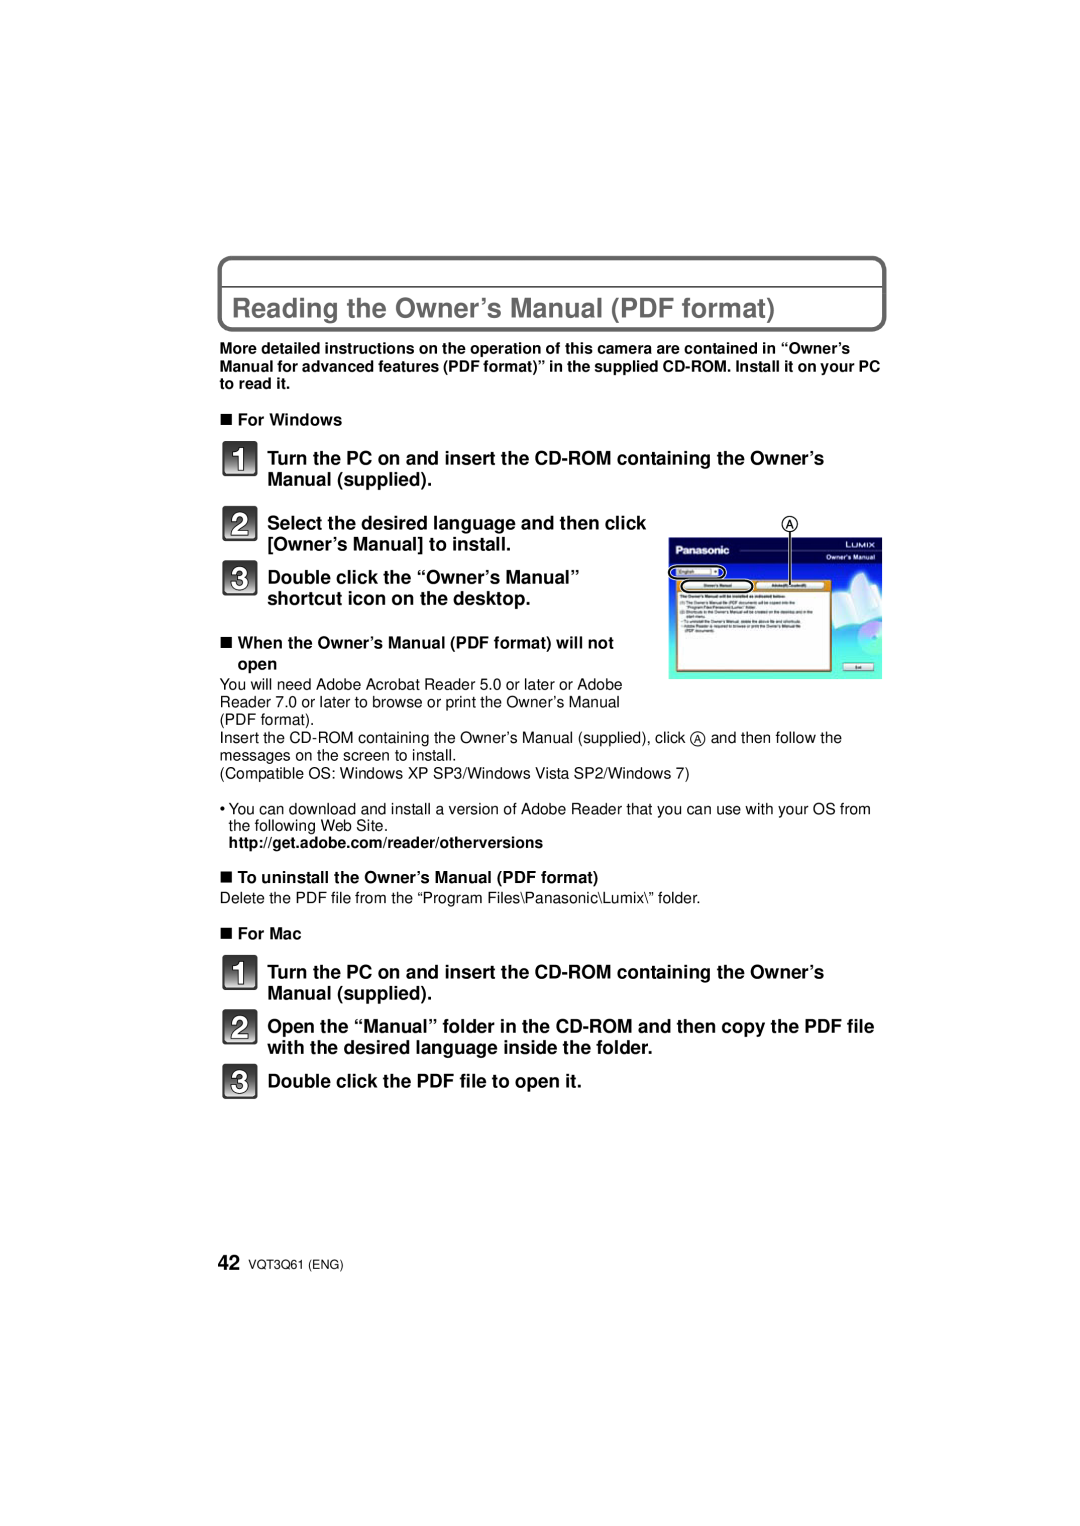 Panasonic DMC-GF3XT Reading the Owner’s Manual PDF format, Double click the “Owner’s Manual” shortcut icon on the desktop 